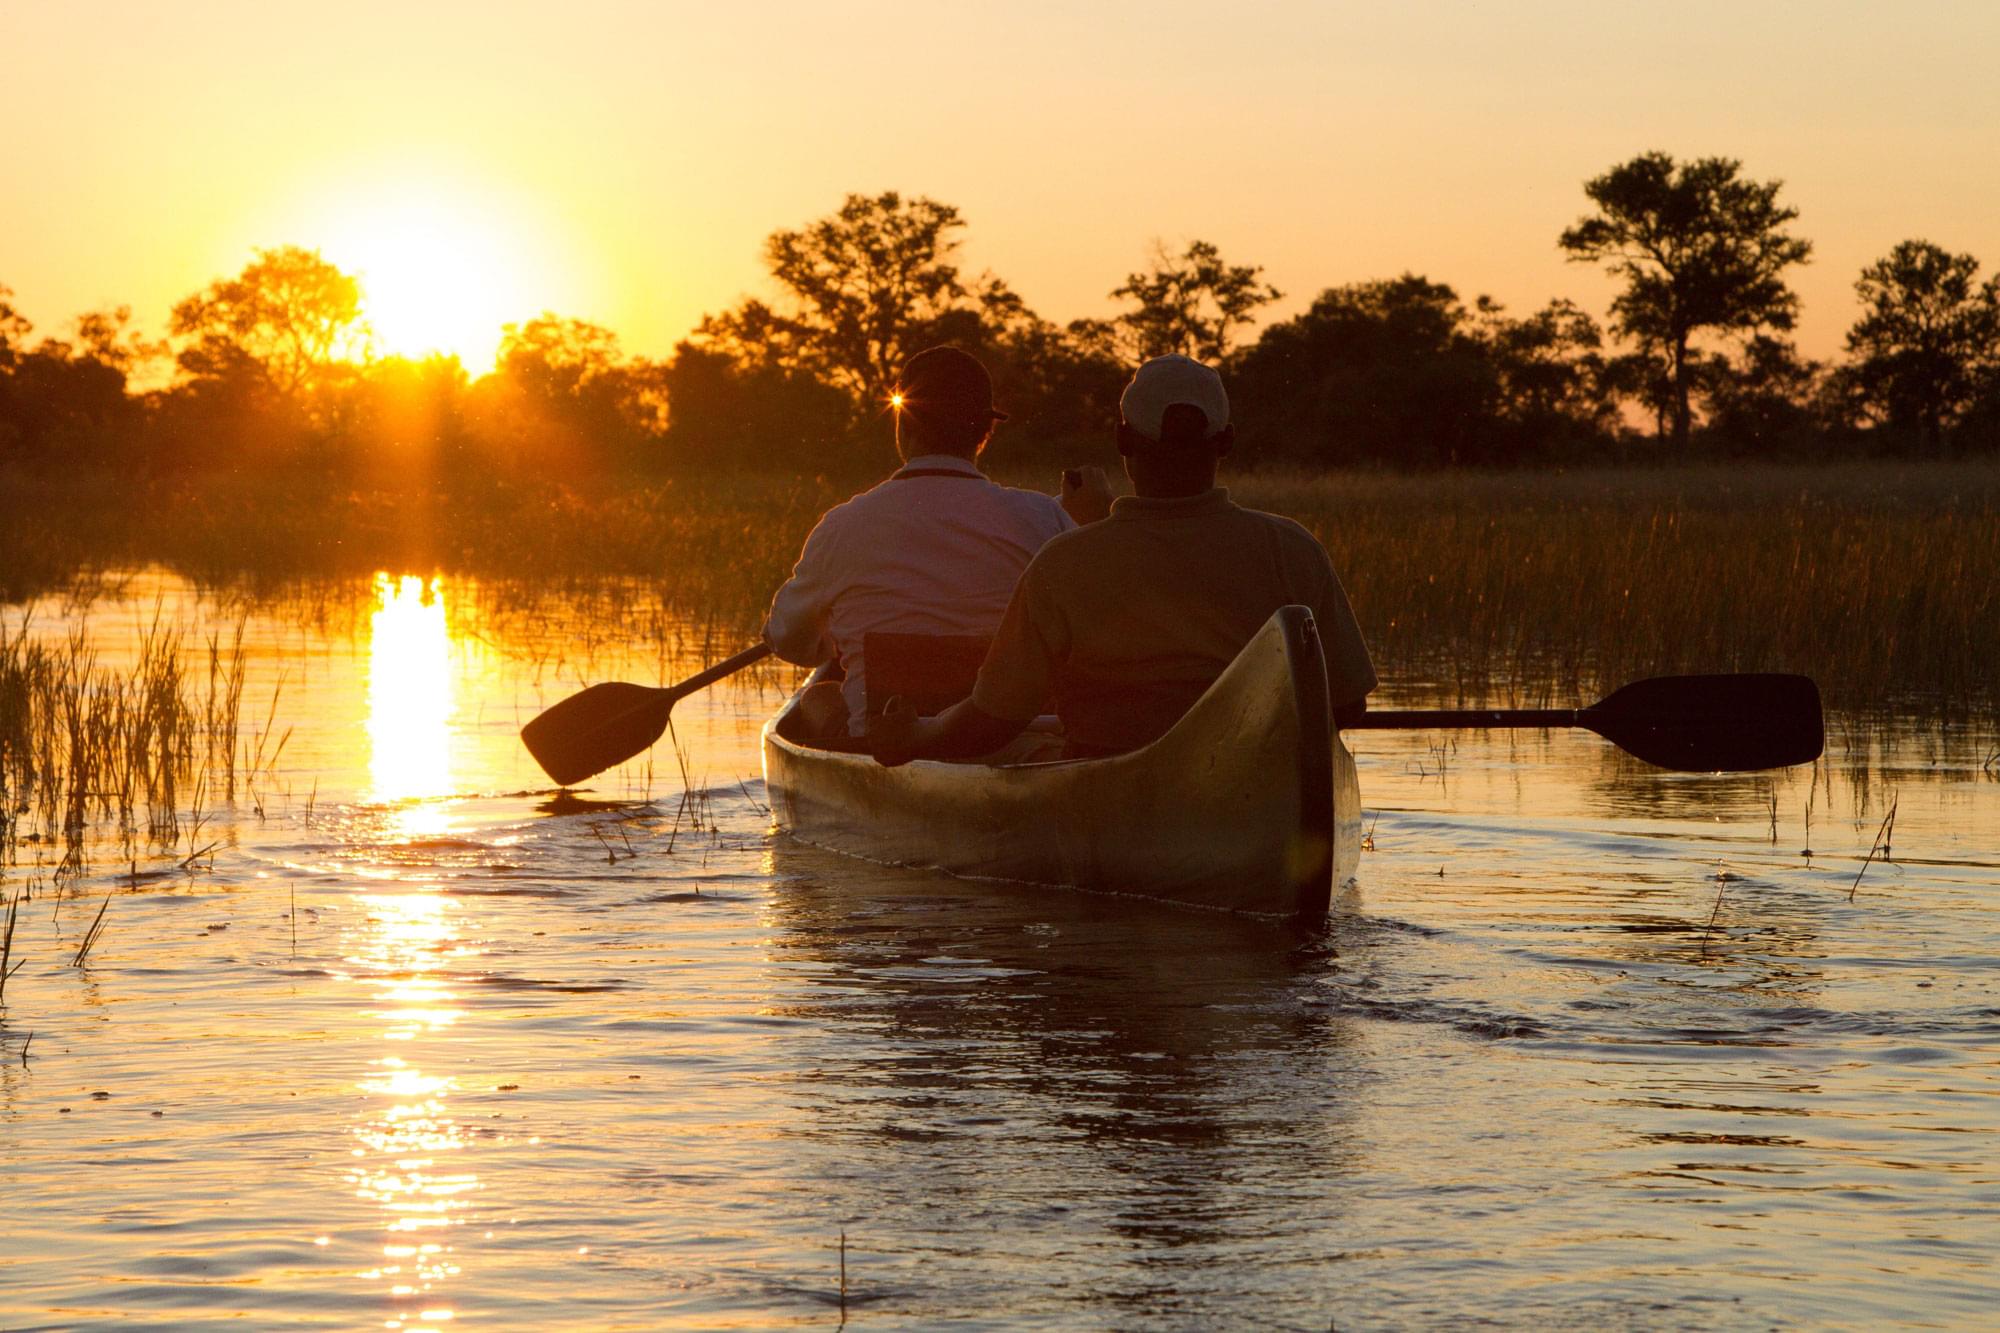 Canoe gliding into the sunset